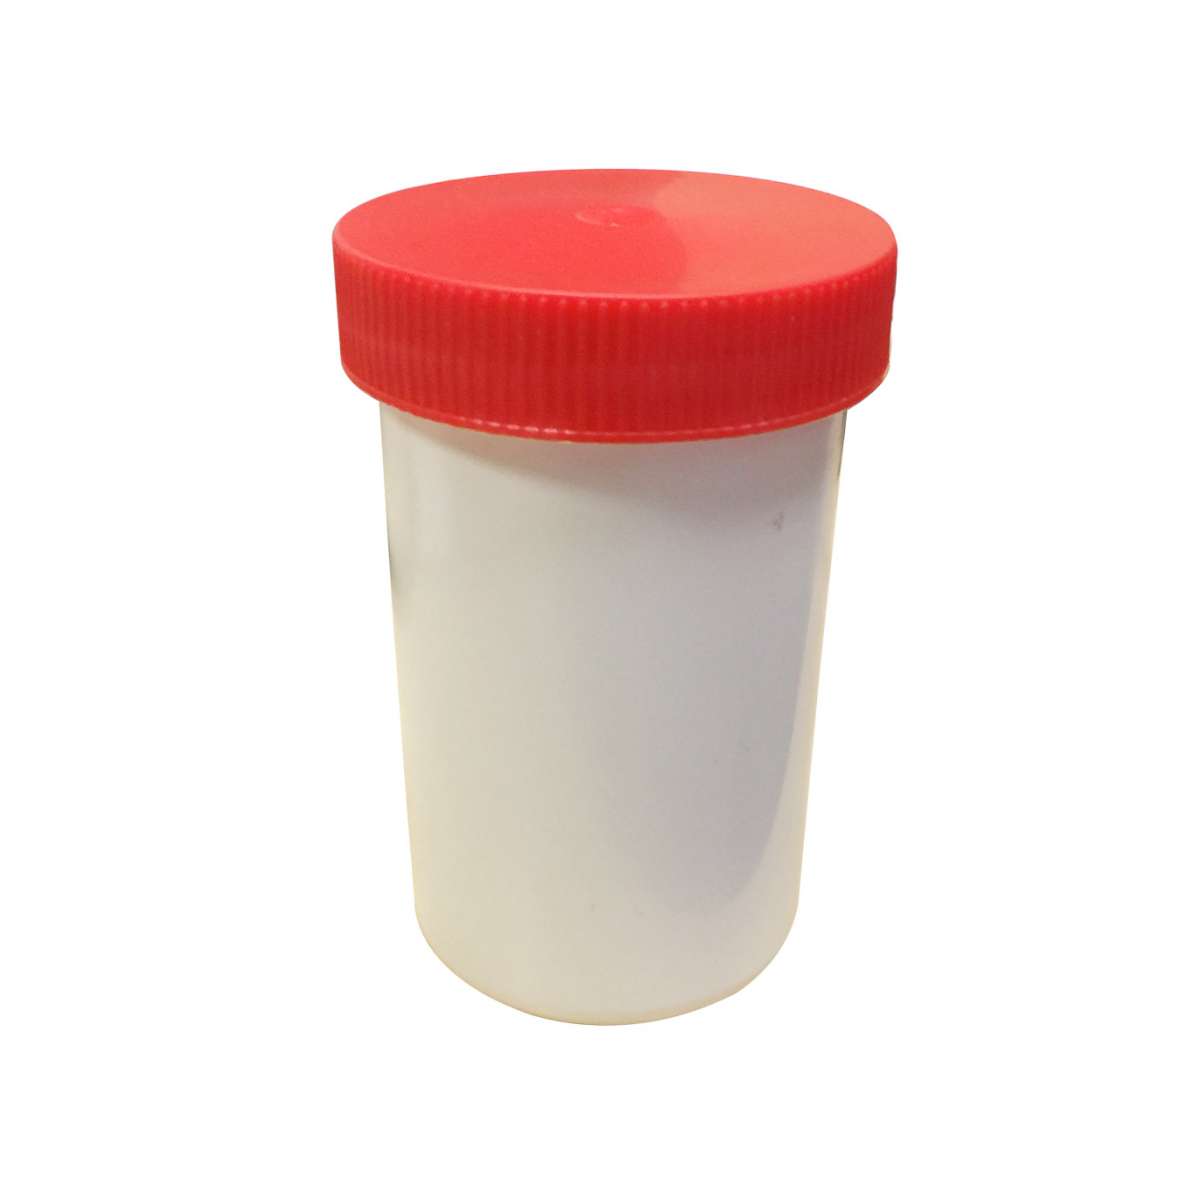 Sample Mailer Container & Sample Bottle Only (No Analysis Included)